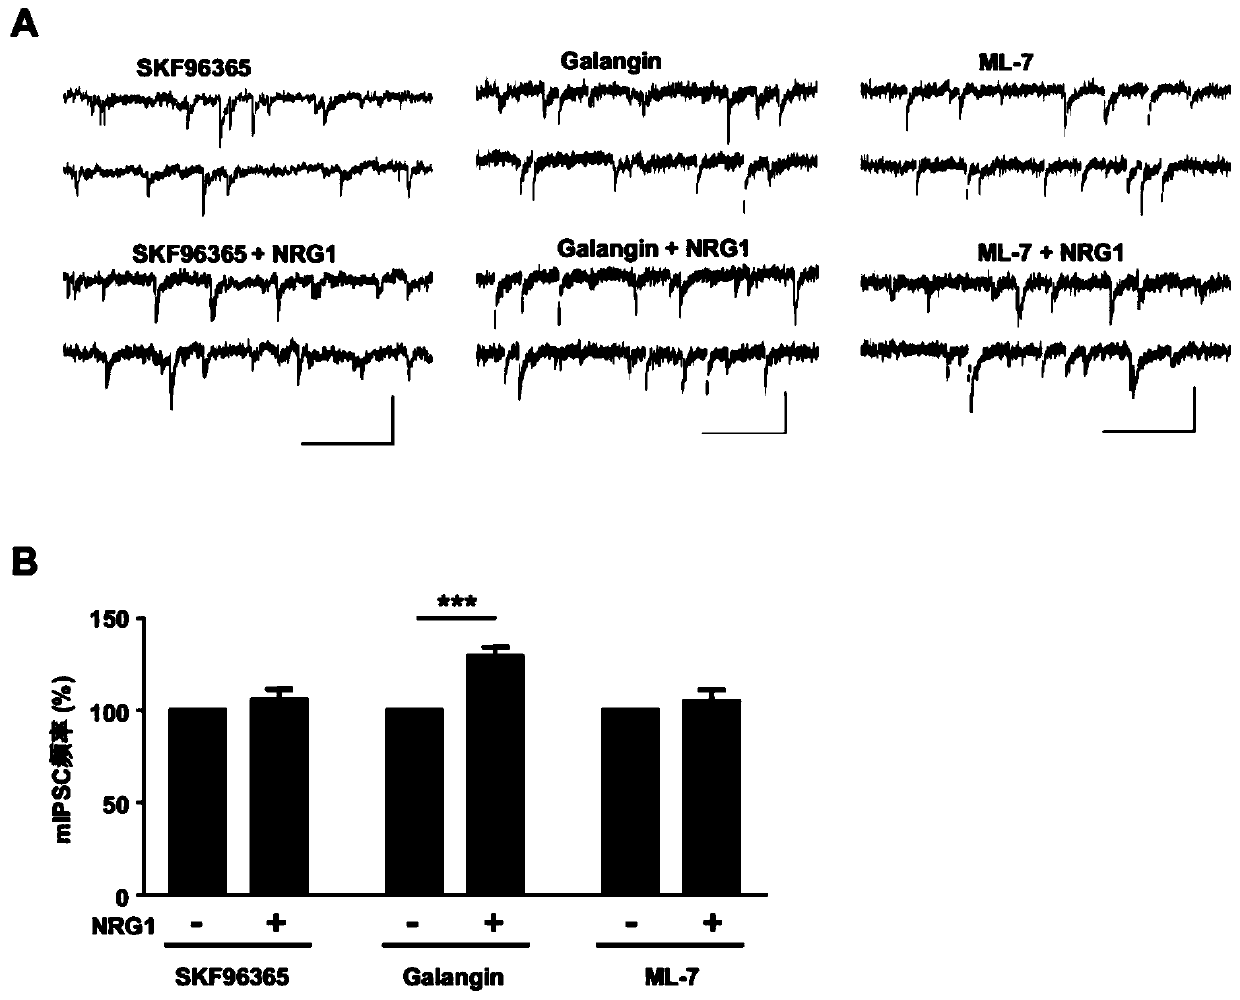 Application of Neuregulin-1 (NRG1) in preparation of product to enhance Transient Receptor Potential Cation Channel Subfamily C Member 6 (TRPC6) channel activity